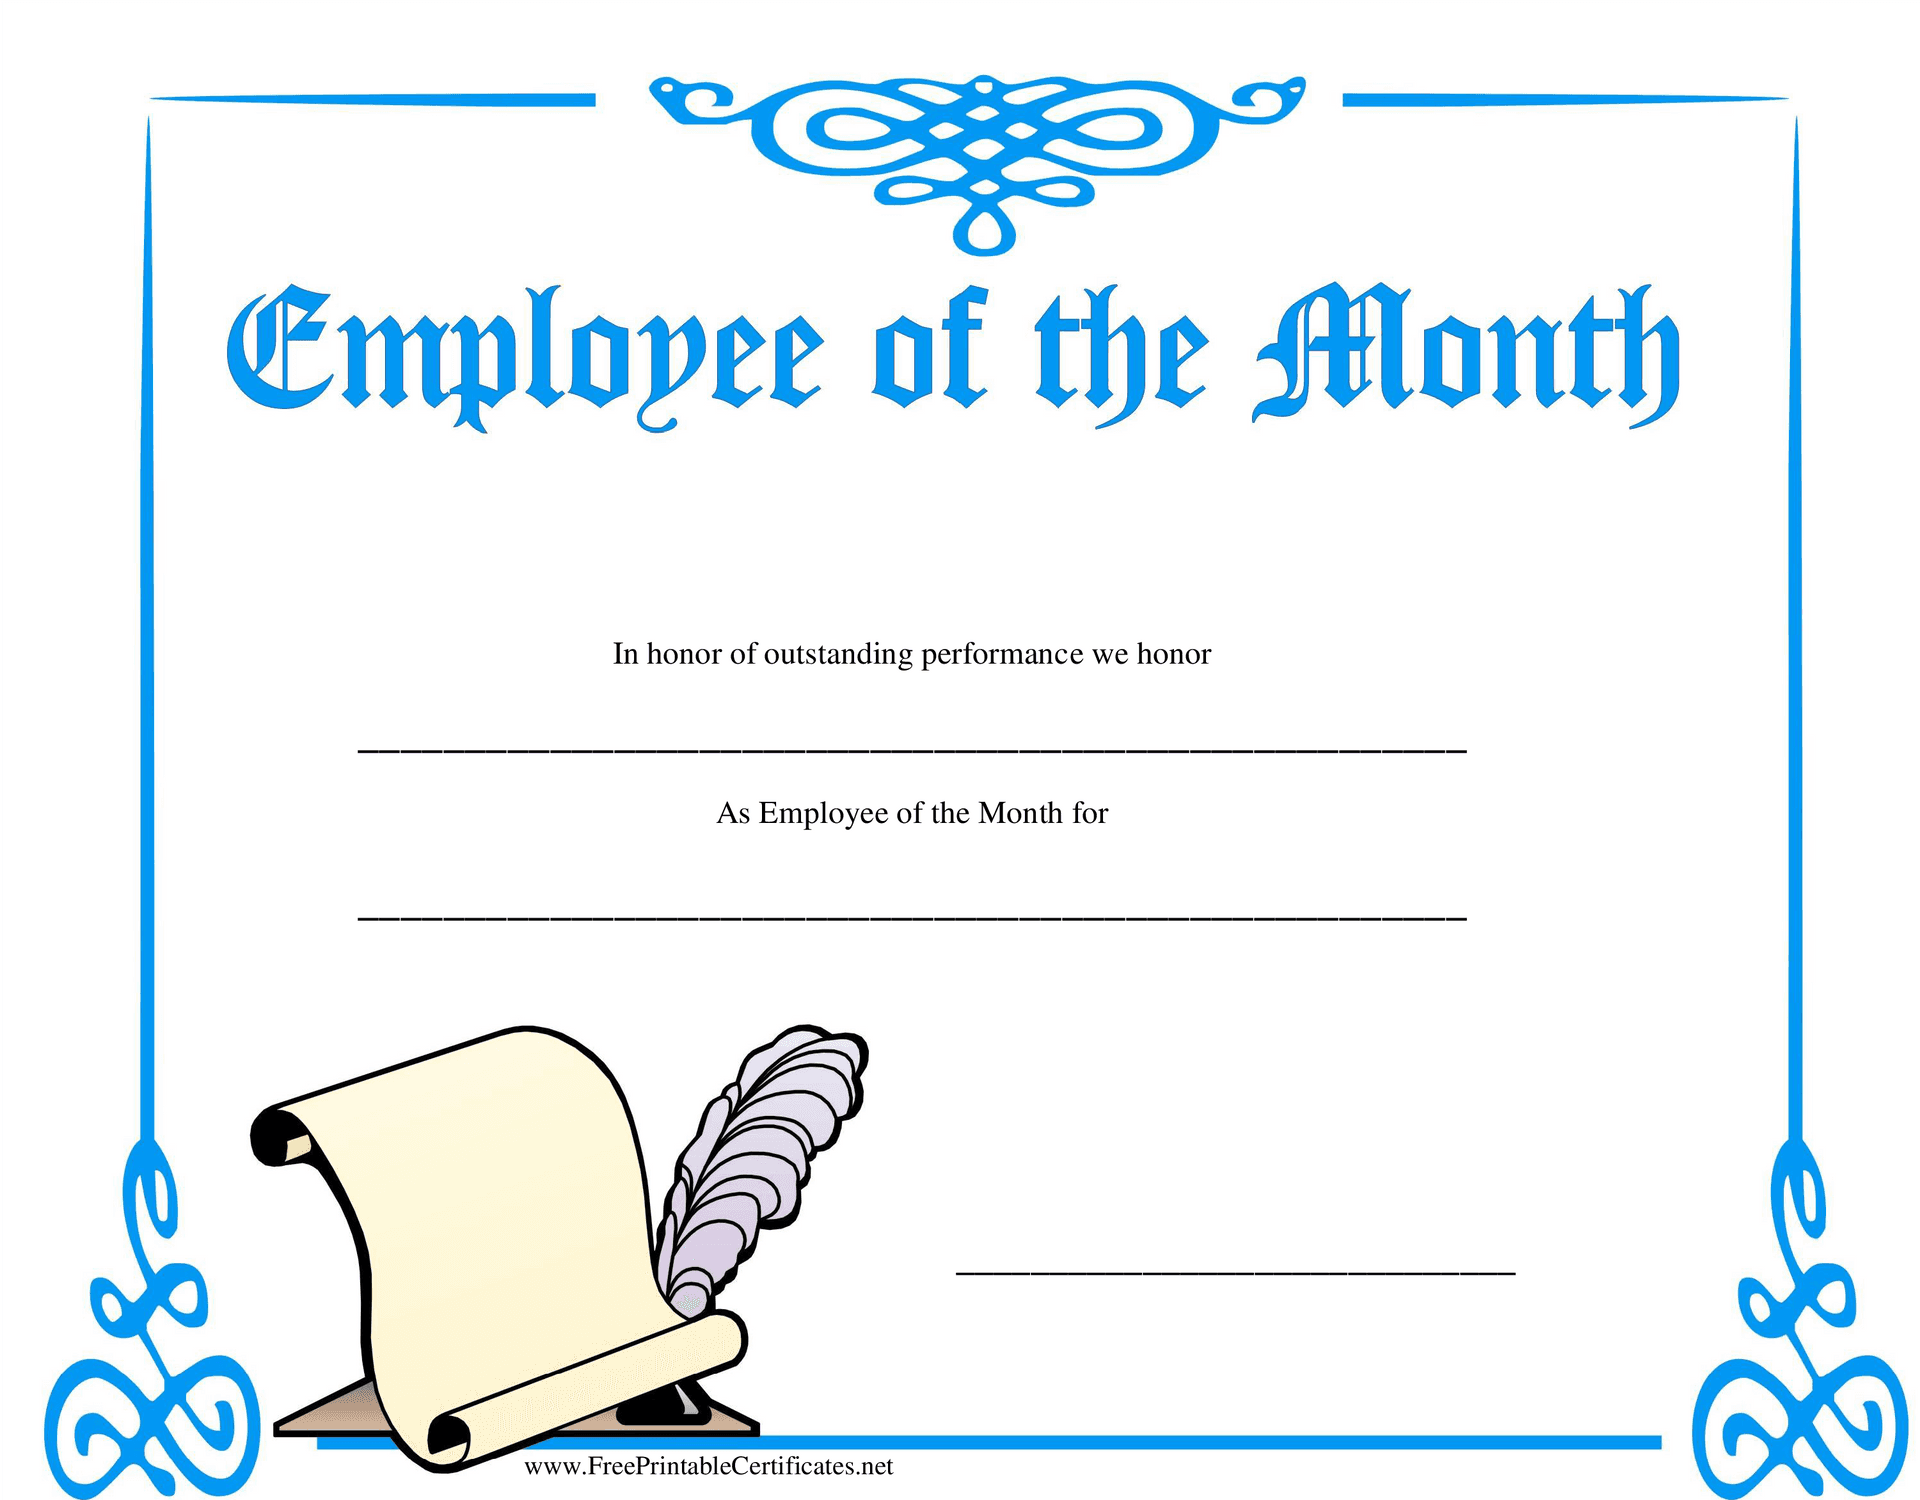 Employeeofthe Month Certificate Template PNG